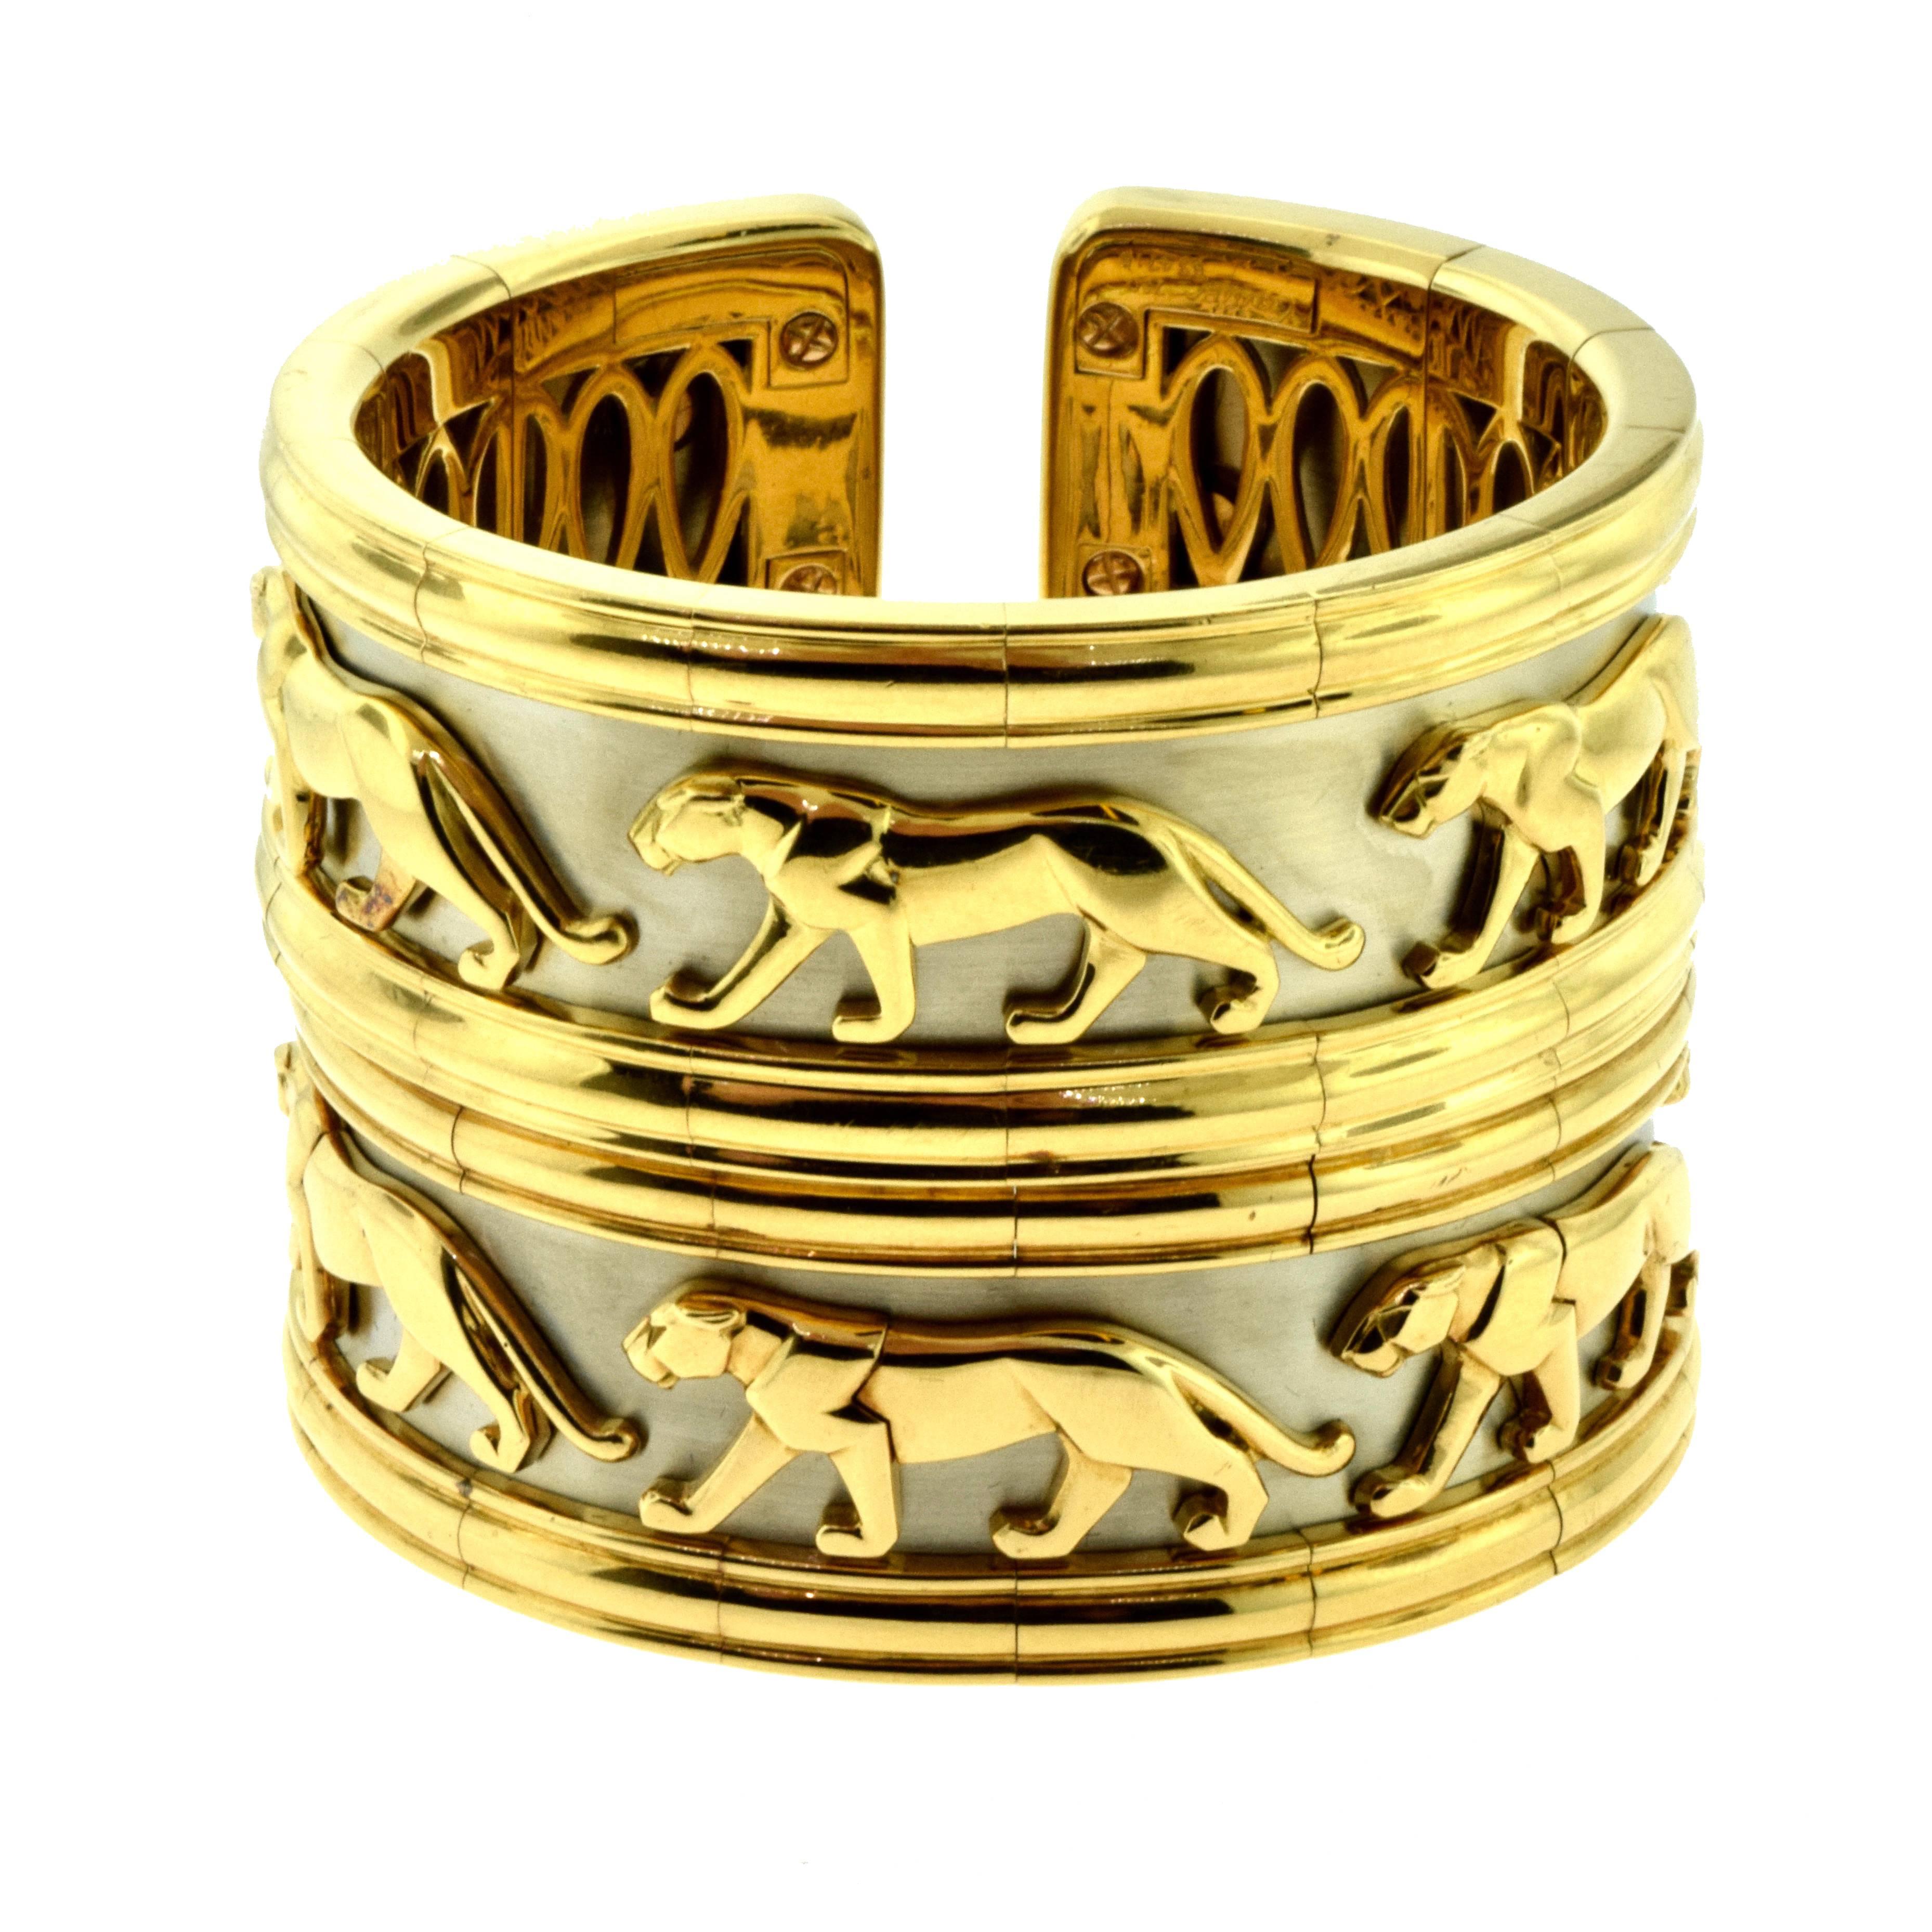 Designer: Cartier
Collection: Pharaon
Metal: 18k White Gold, 18k Yellow Gold
Bracelet Size: Flexible - will fit anywhere from a small to a large wrist size
Total Item Weight (g): 221.3 (both bracelets together)

Instantly recognizable Cartier, given